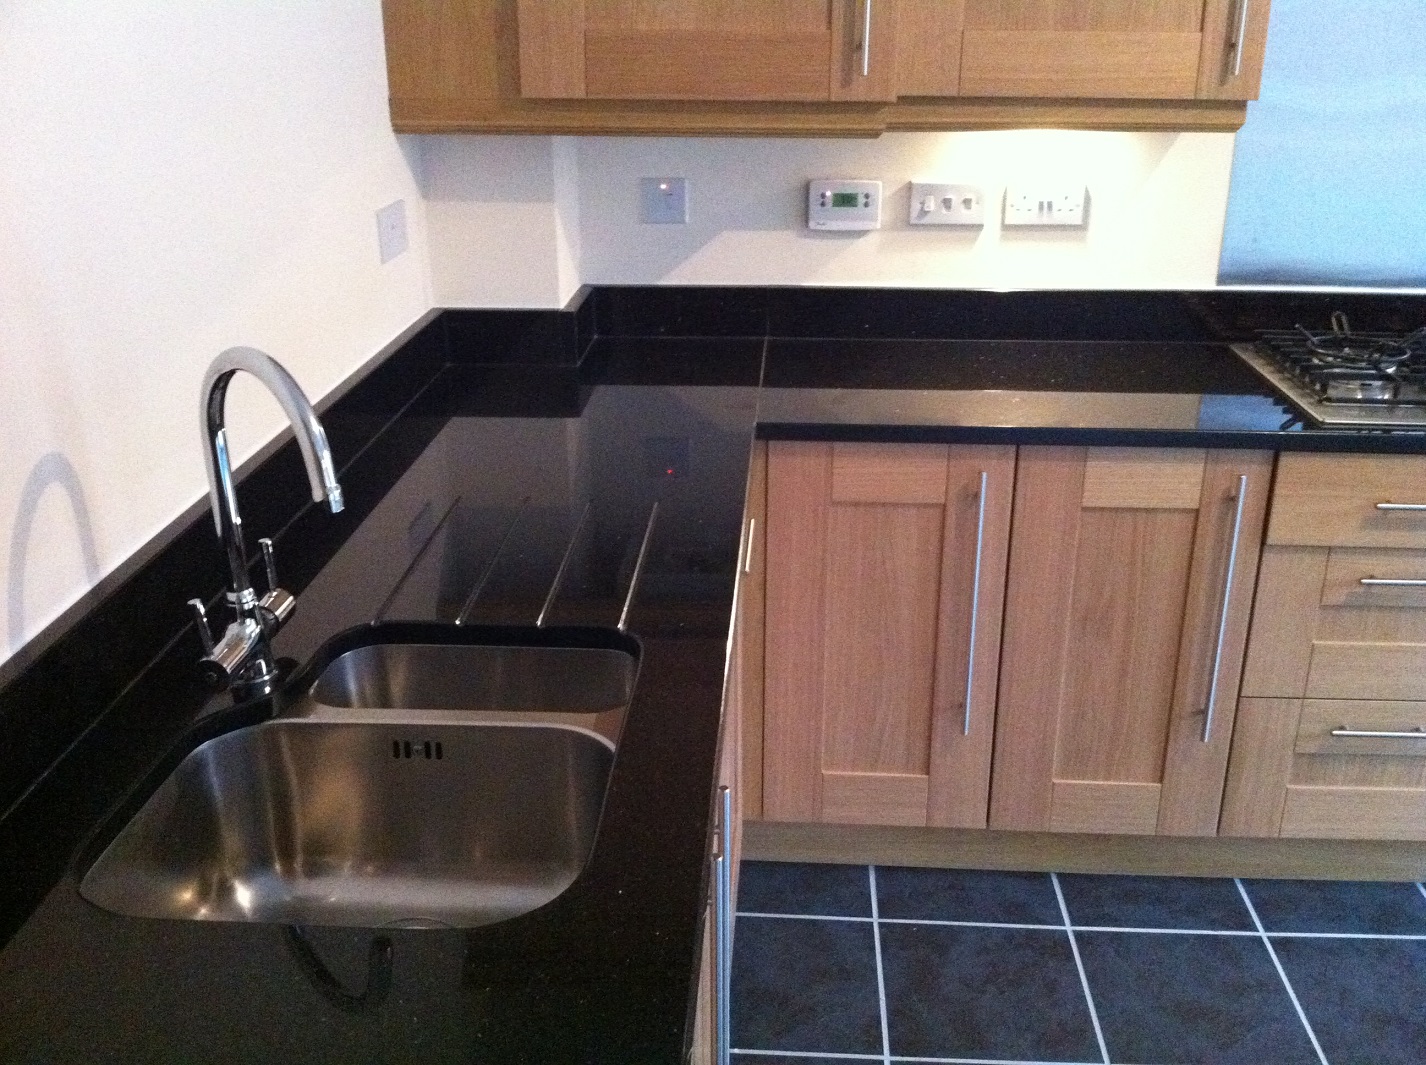 We supply Granite and Quartz Worktops in the york Area. We supply Granite and Quartz Worktops in the Helmsley Area. We supply Granite and Quartz Worktops in the Pickering Area. We supply Granite and Quartz Worktops in the Malton Area. We supply Granite and Quartz Worktops in the Easingwold Area. We supply Granite and Quartz Worktops in the Ripon Area. We supply Granite and Quartz Worktops in the Thirsk Area. We supply Granite and Quartz Worktops in the Pocklington Area. We supply Granite and Quartz Worktops in the Wetherby Area. We supply Granite and Quartz Worktops in the Tockwith Area. We supply Granite and Quartz Worktops in the Selby Area. We supply Granite and Quartz Worktops in the Tadcaster Area. We supply Granite and Quartz Worktops in the Haxby Area. We supply Granite and Quartz Worktops in the Huby Area. We supply Granite and Quartz Worktops in the Norton Area. We supply Granite and Quartz Worktops in the Scarborough Area. We supply Granite and Quartz Worktops in the Bridlington Area. We supply Granite and Quartz Worktops in the Driffield Area. We supply Granite and Quartz Worktops in the Bubwith Area. We supply Granite and Quartz Worktops in the Filey Area. We supply Granite and Quartz Worktops in the Kirbymoorside Area.